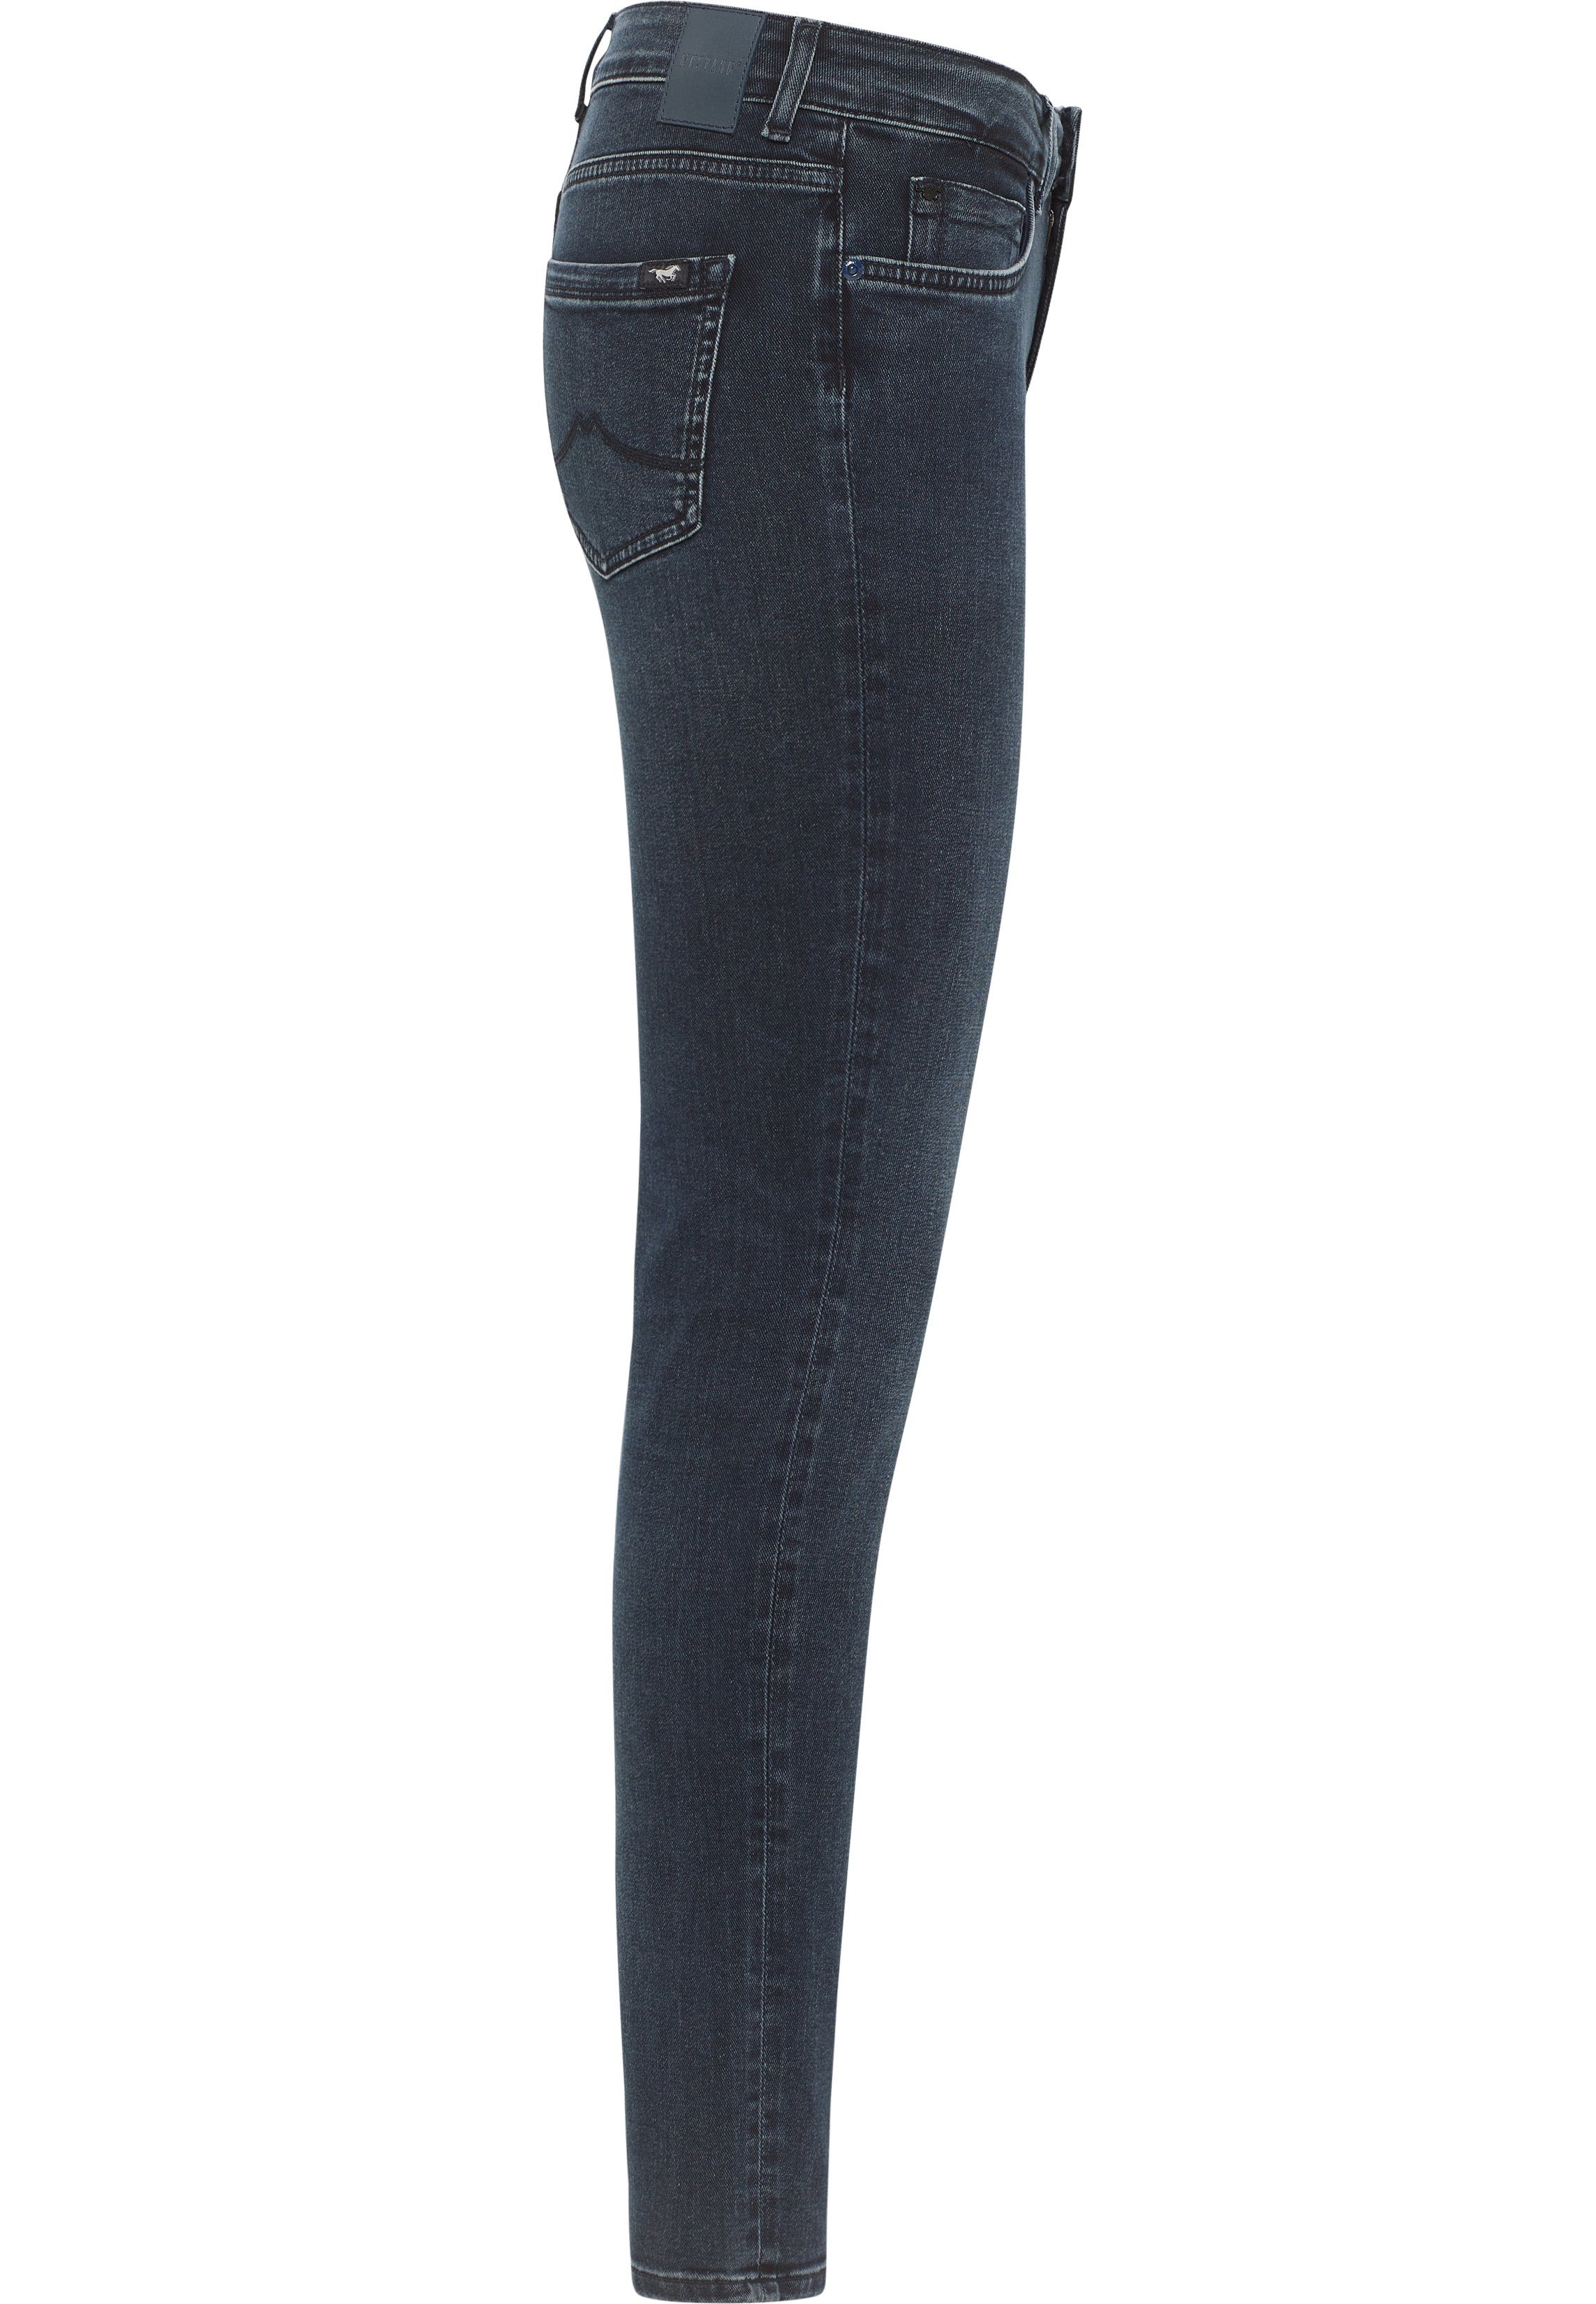 Shelby Skinny Skinny-fit-Jeans dunkelblau-5000883 MUSTANG Style